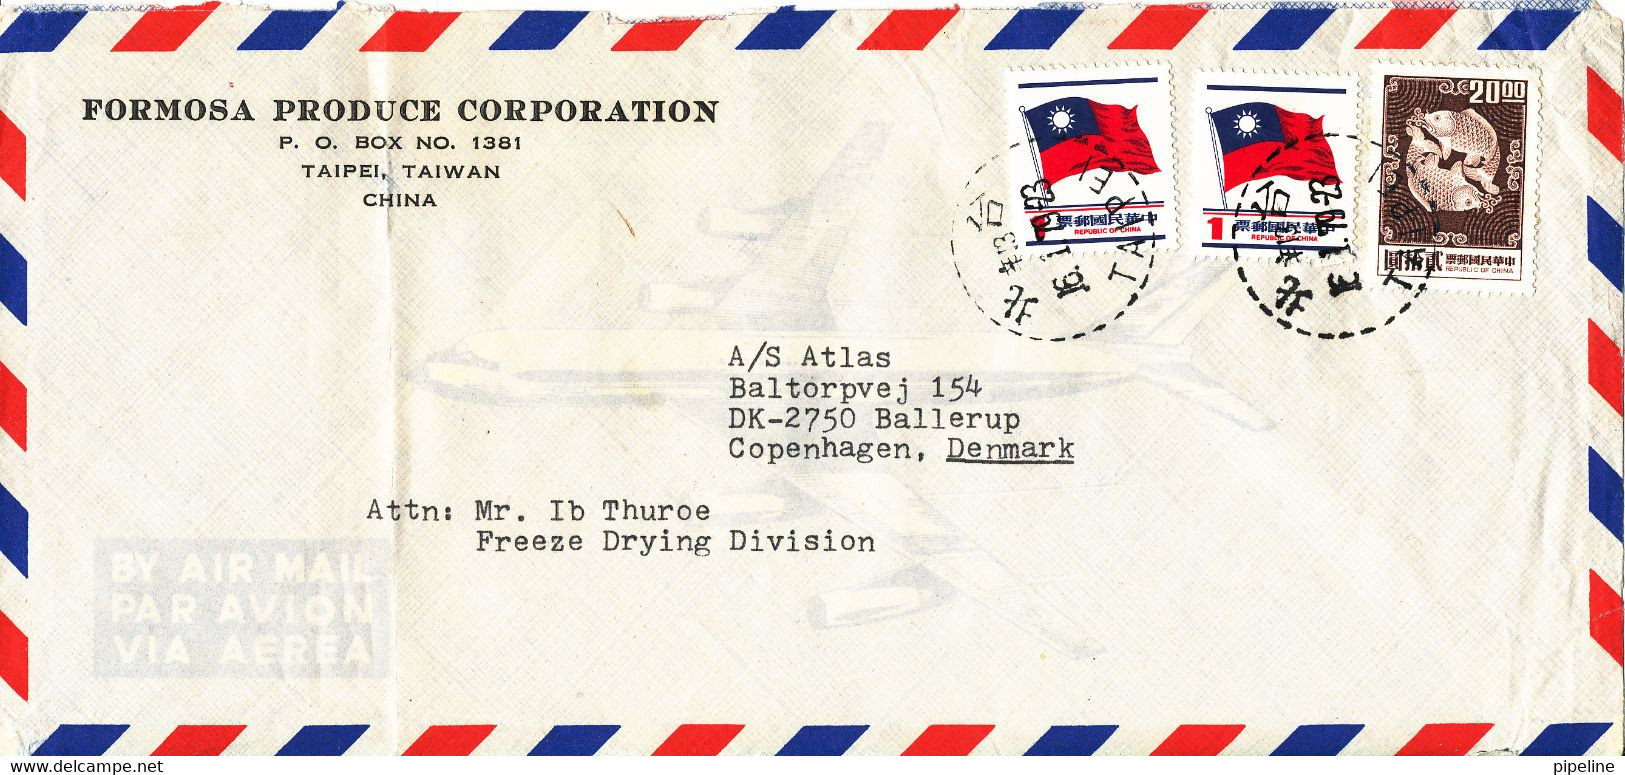 Taiwan Air Mail Cover Sent To Denmark 16-1-1979 (the Cover Is Folded In The Left Side) - Airmail